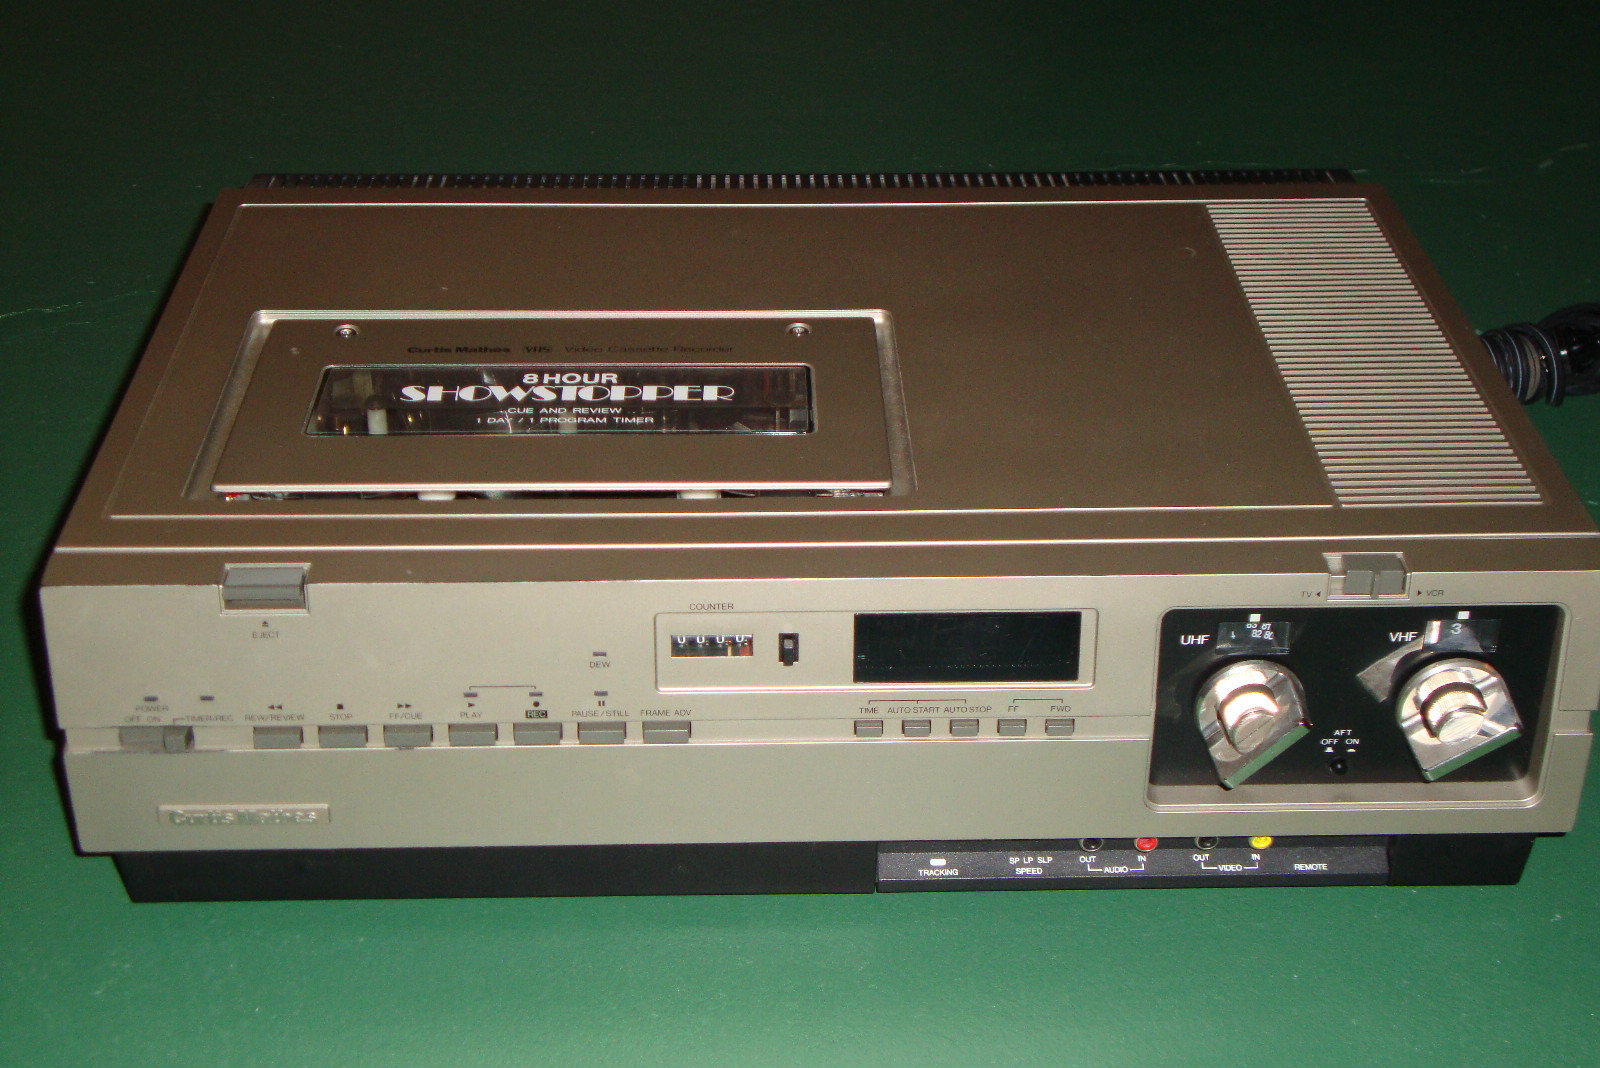 who invented the vcr